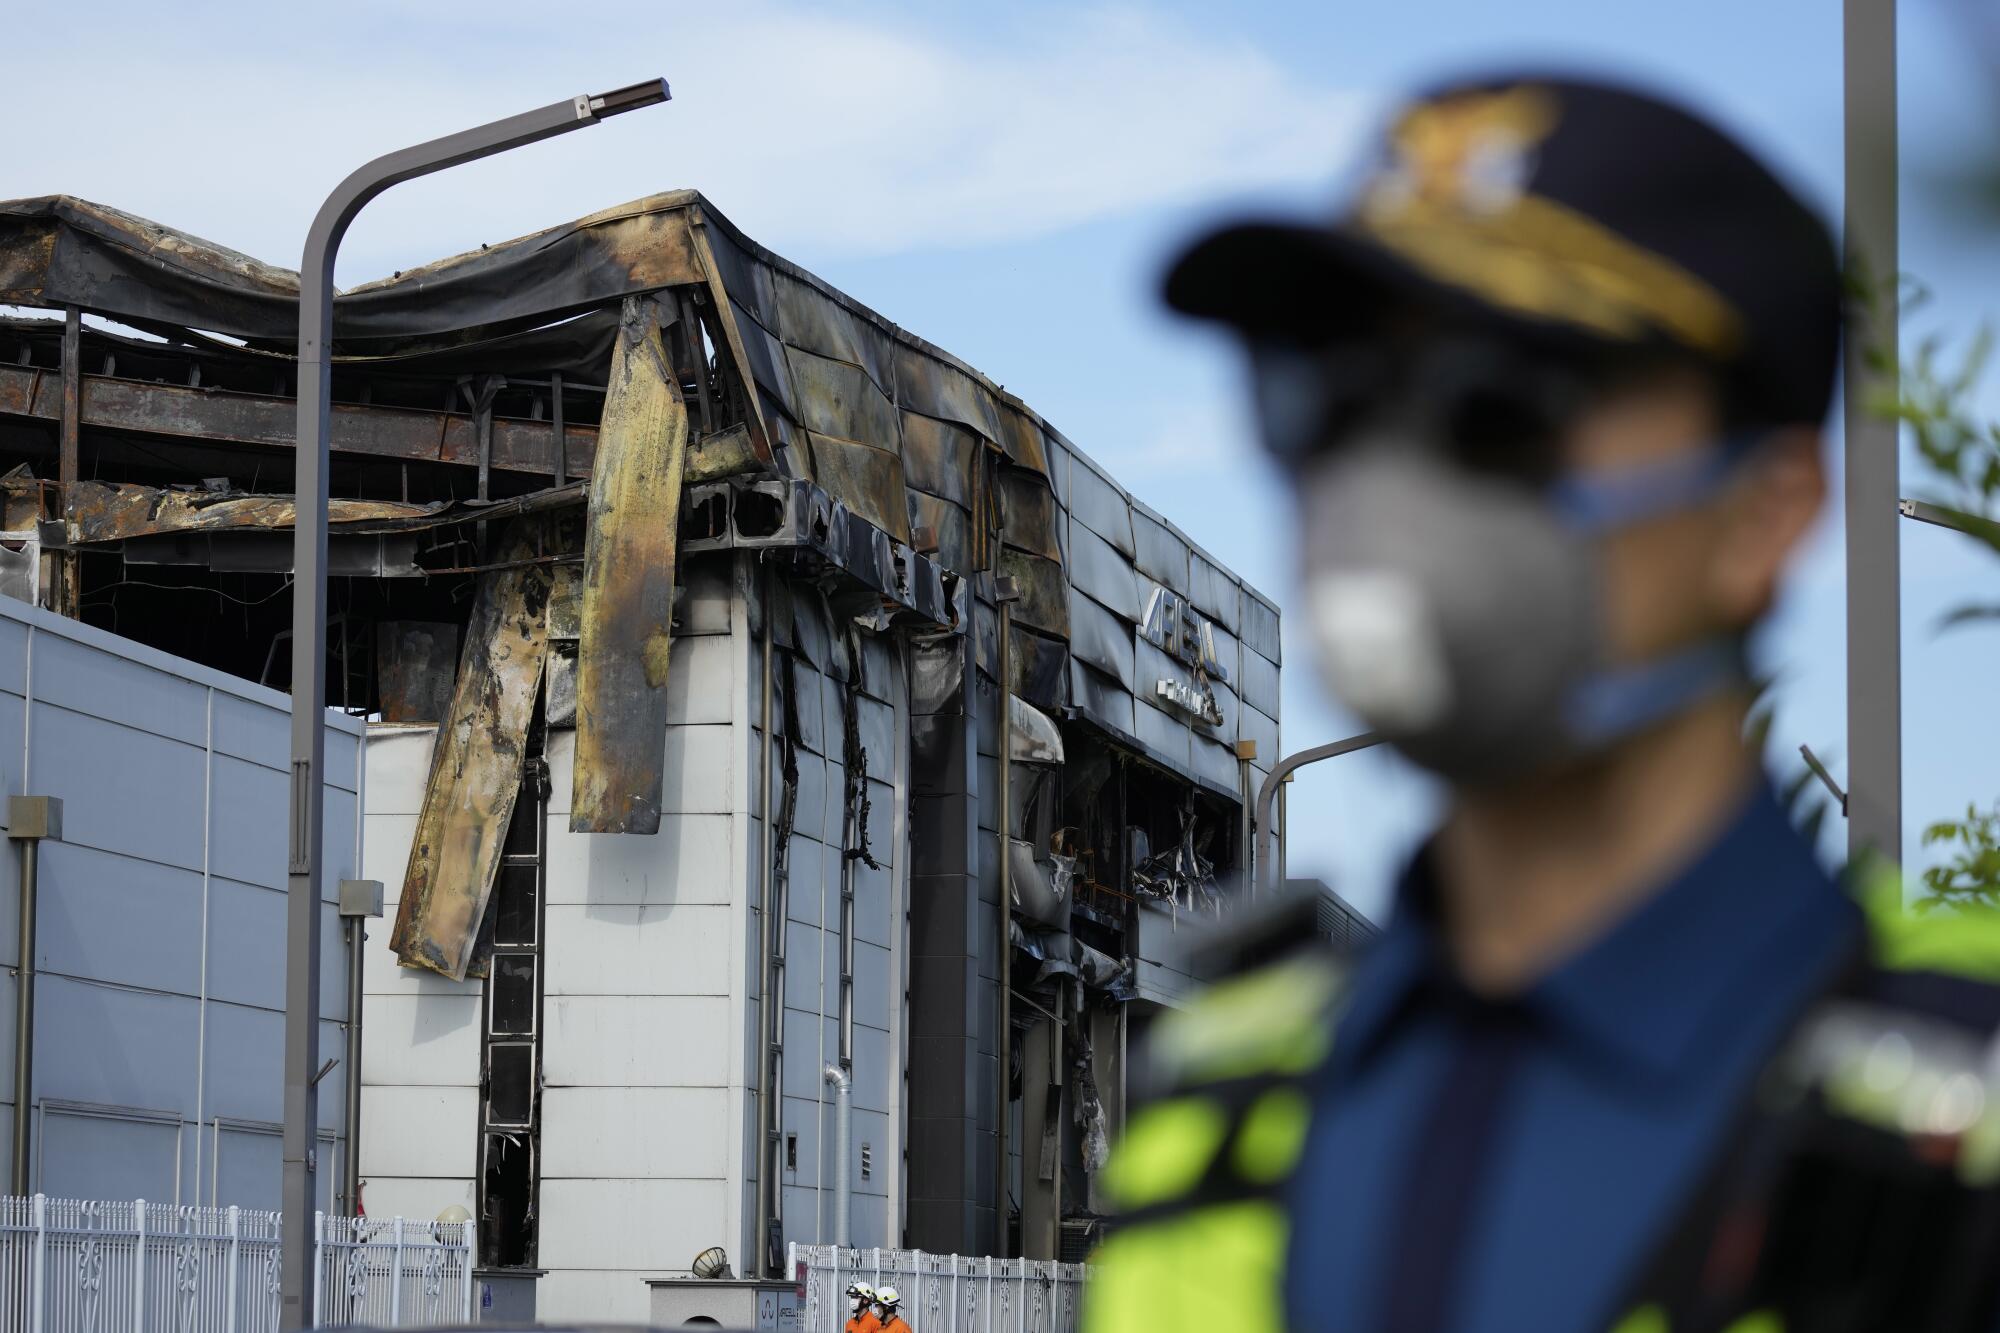 A police officer, out of focus in the front of the frame, stands near a burned-out building.